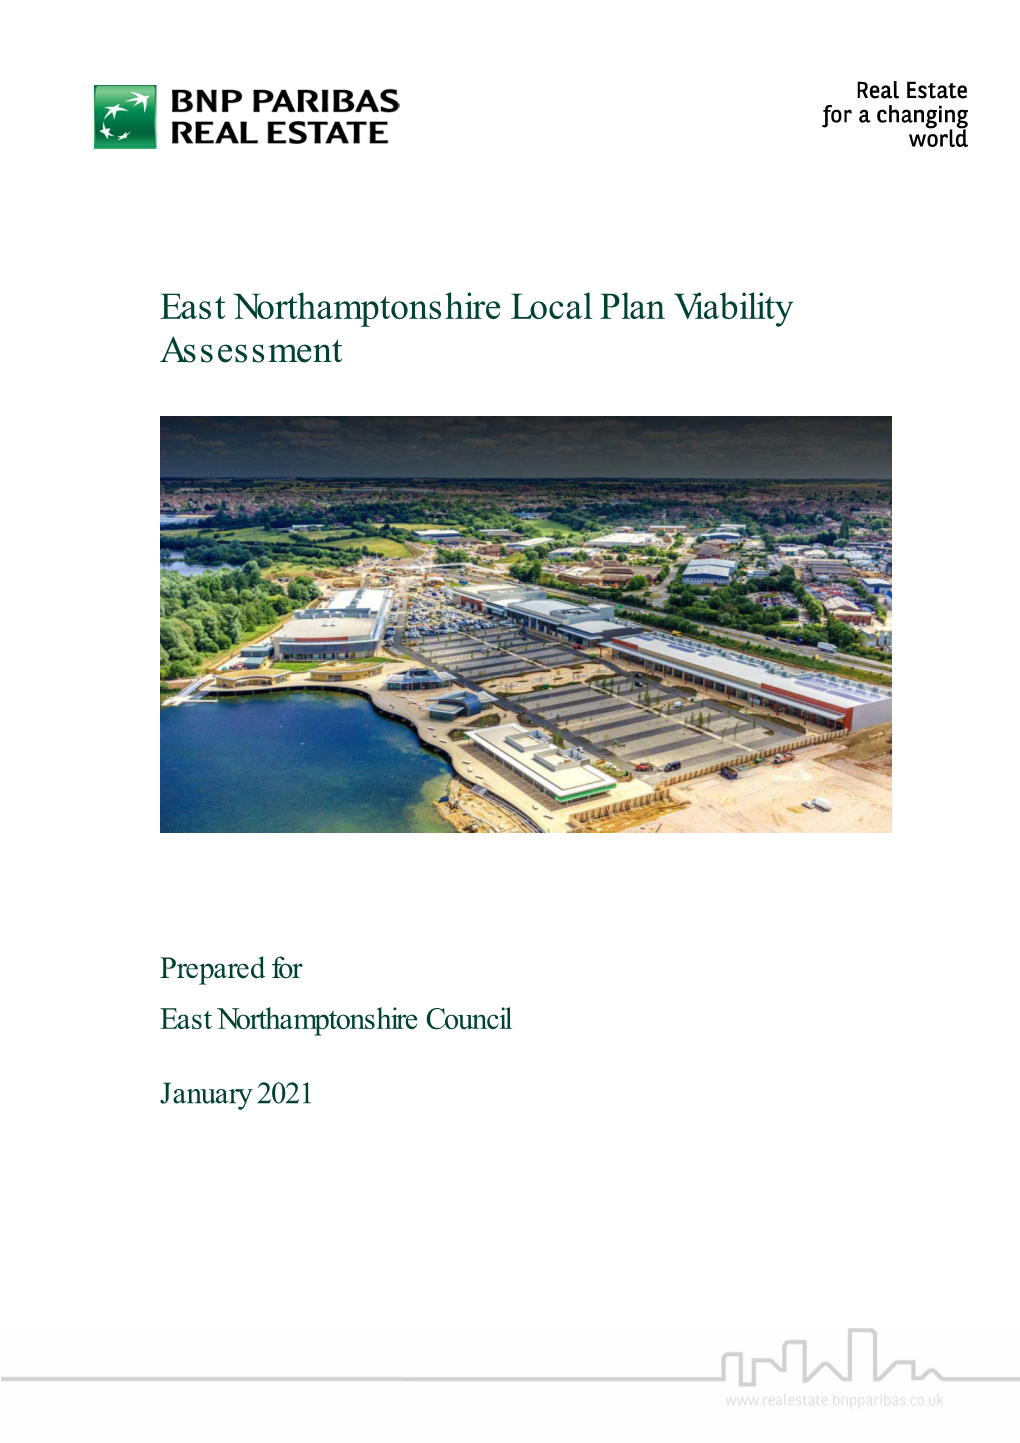 East Northamptonshire Local Plan Viability Assessment